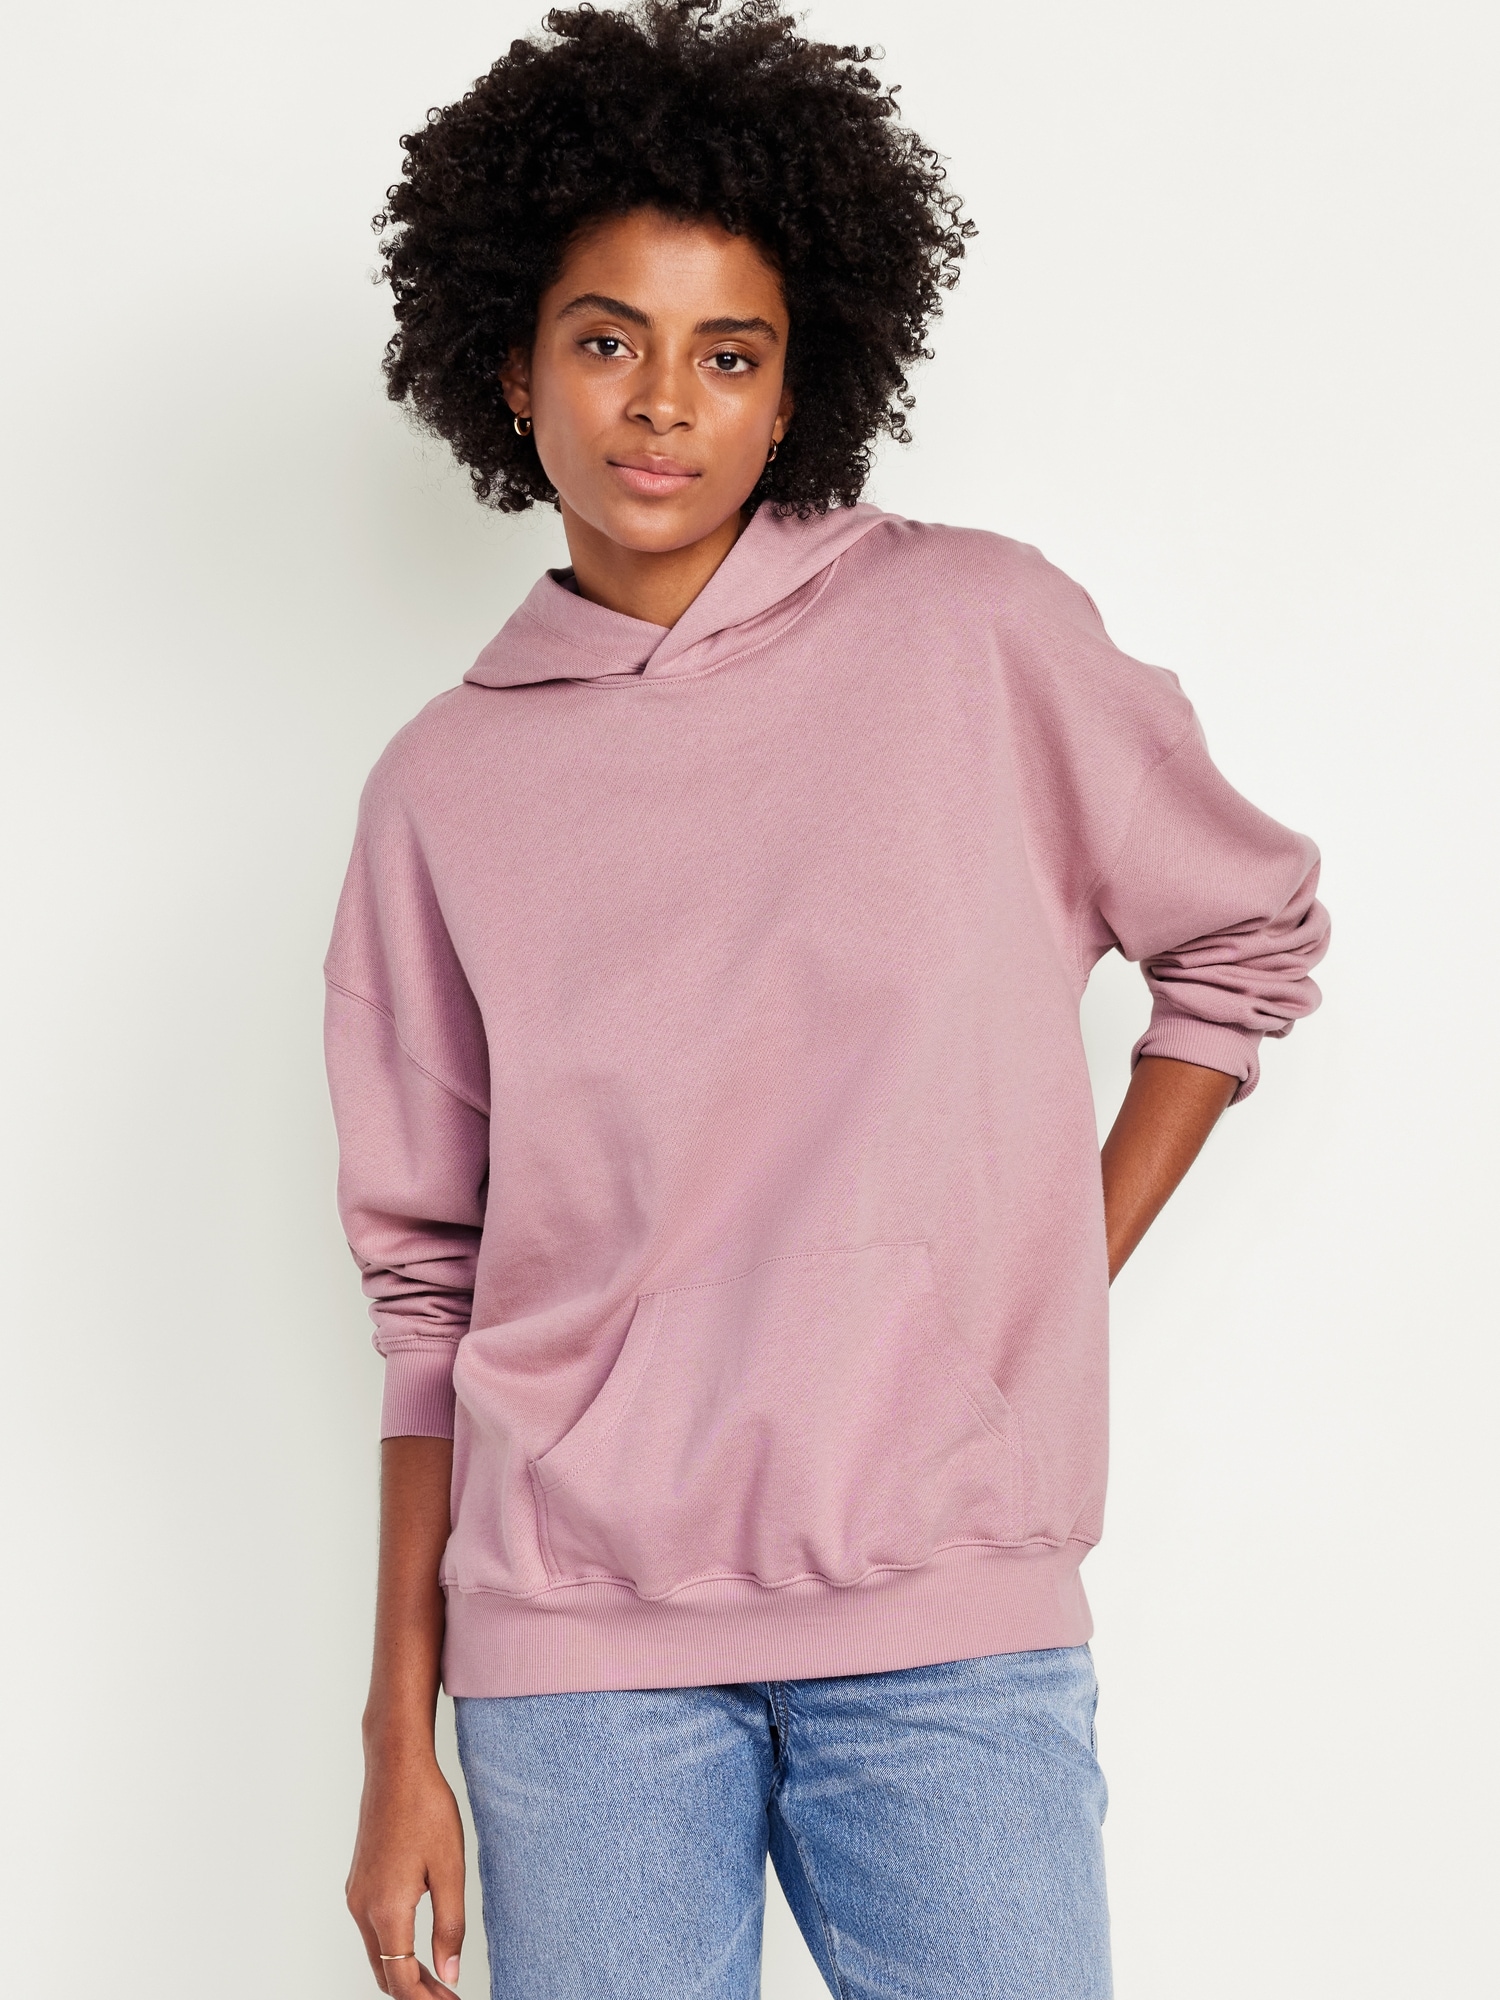 Oversized Pullover Hoodie Hot Deal